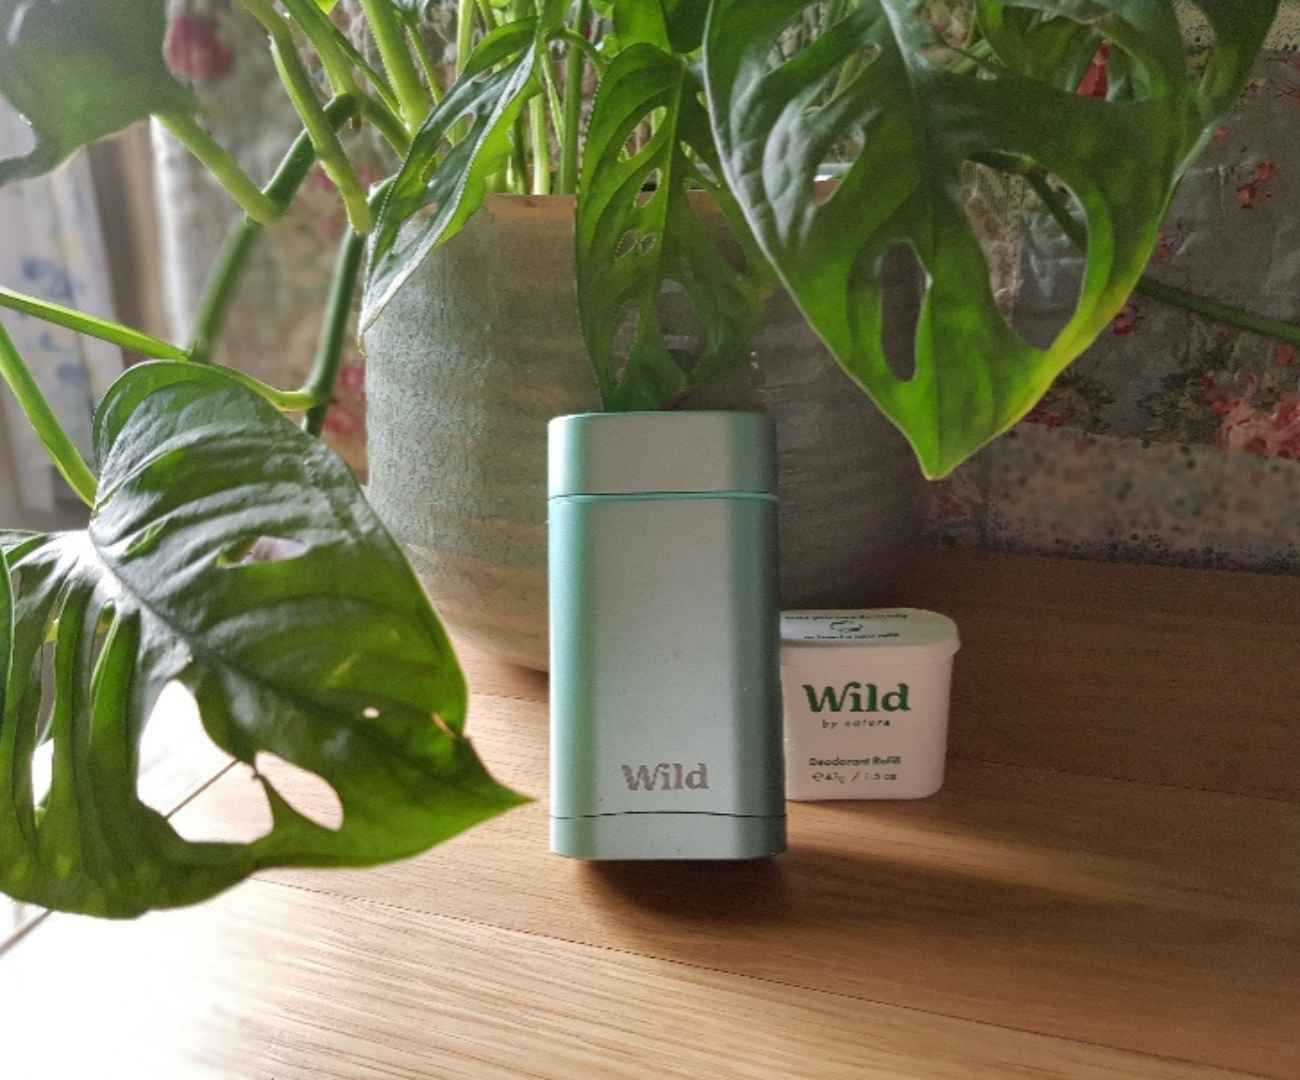 Wild natural deodorant case in pale metallic green in front of a pale green plant pot containing a 'monkey Mask' plant that has large lobed leaves with holes in. Slightly behind and to the right of the deodorant case is a Wild deodorant refill in a small white cardboard container, with the Wild branding in green lettering on the front. This image reflects this blog about the Wild deodorant review